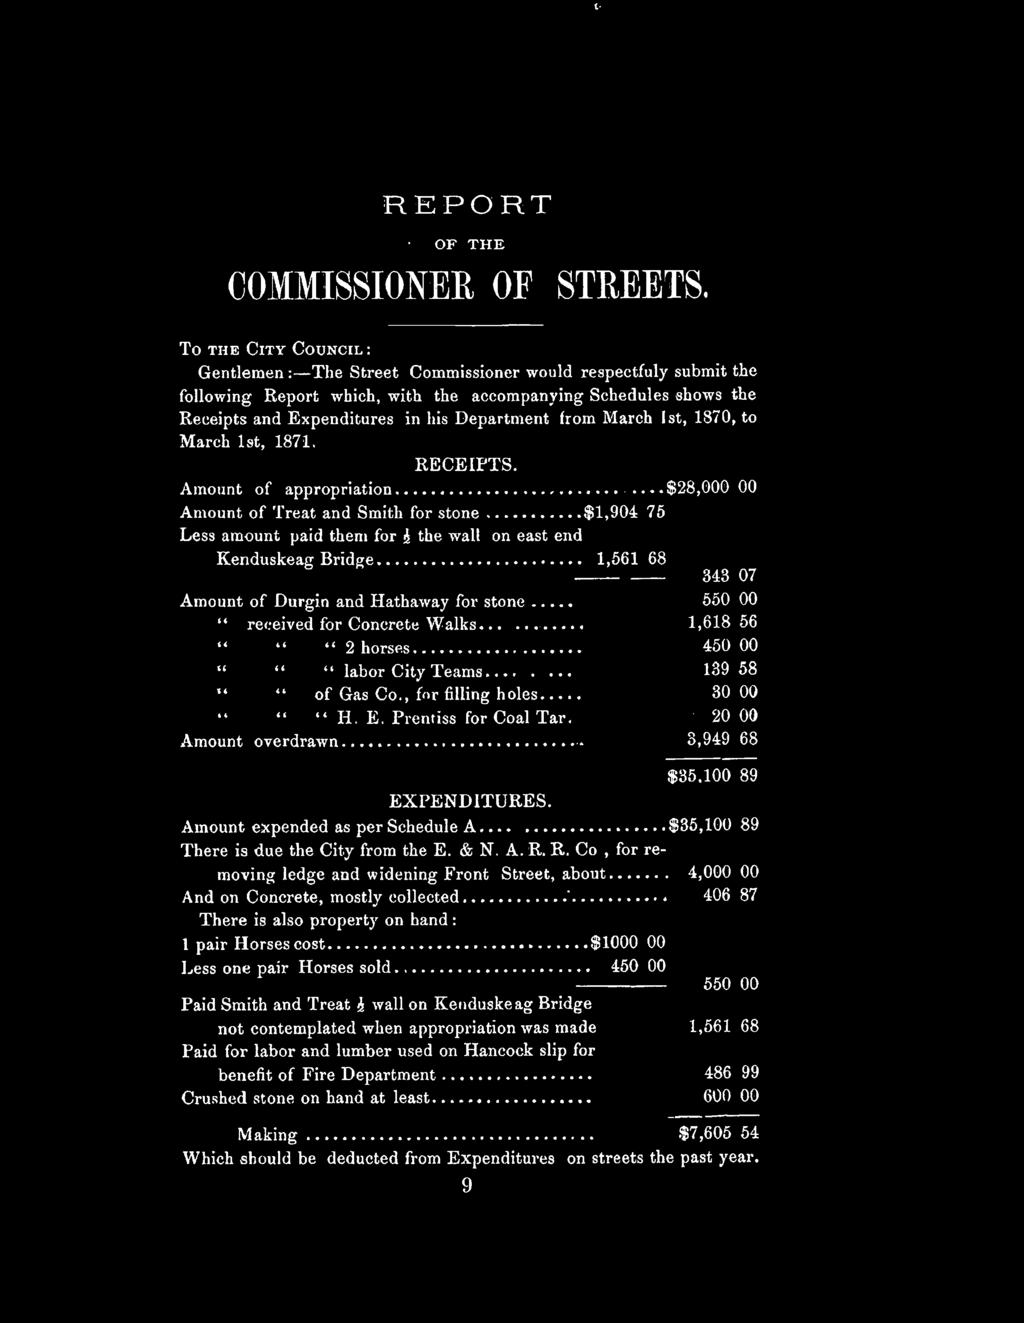 Department from March 1st, 1870, to March 1st, 1871. RECEIPTS. Amount of appropriation......$28,000 00 Amount of Treat and Smith for stone.